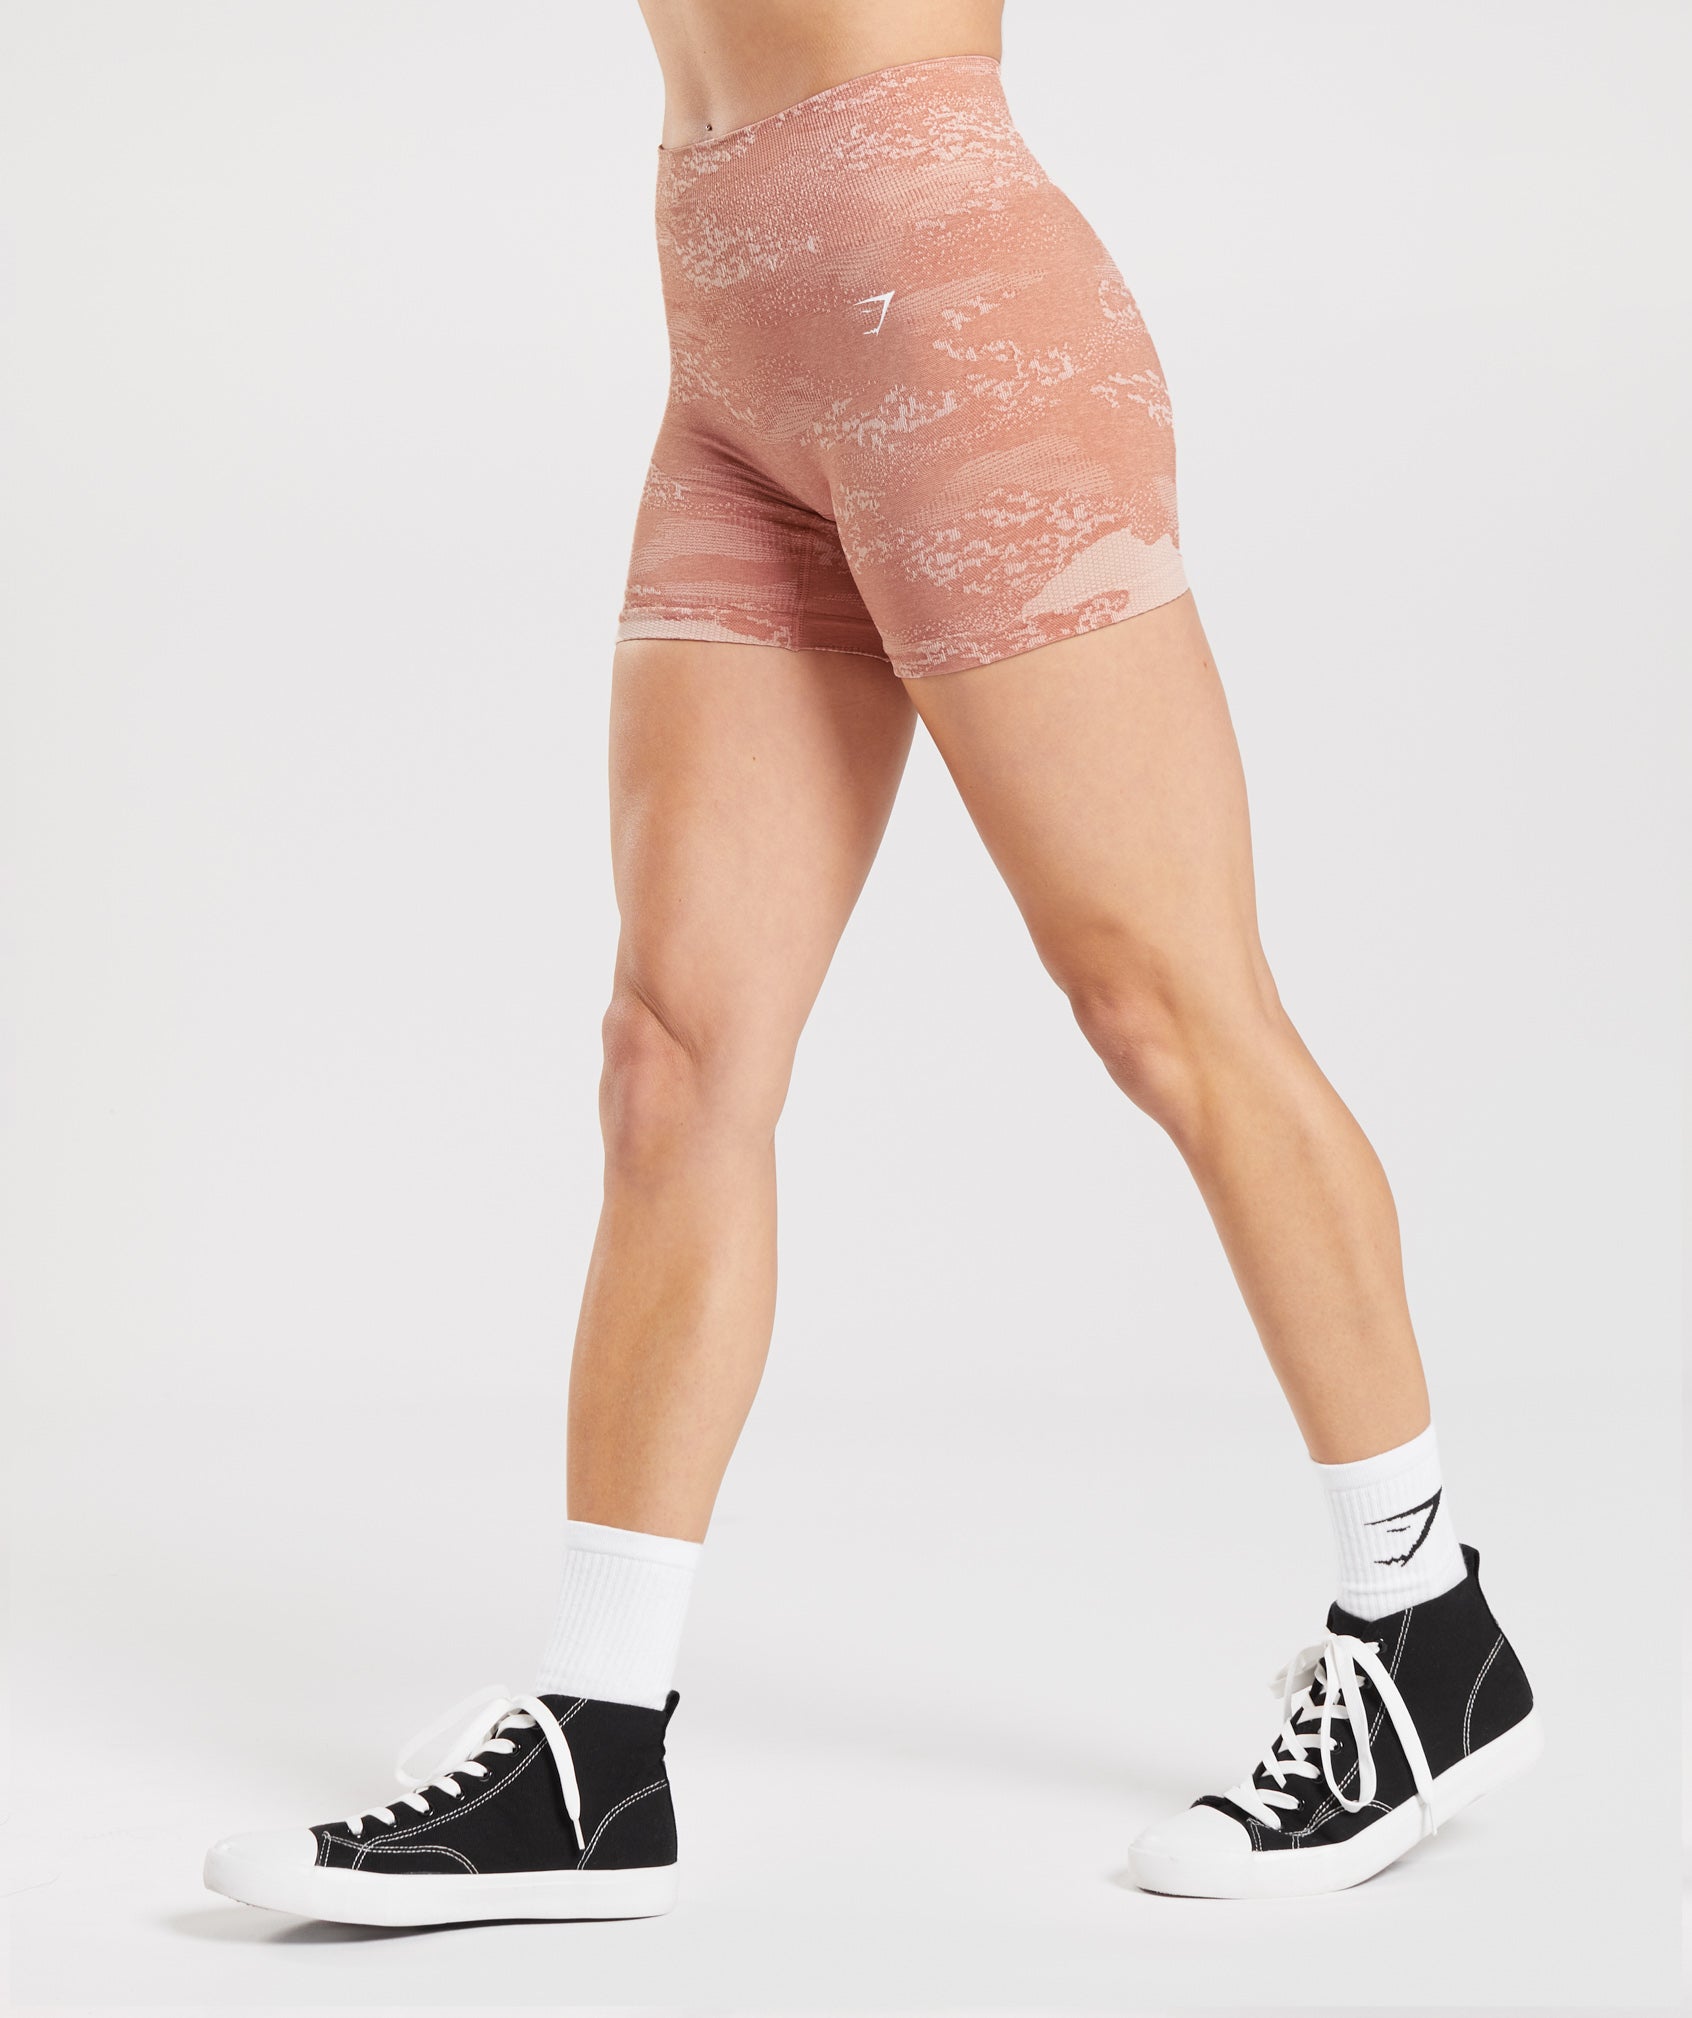 Yogalicious Lux Camo High Rise Bike Shorts In P594 Camo Marble Pink Combo